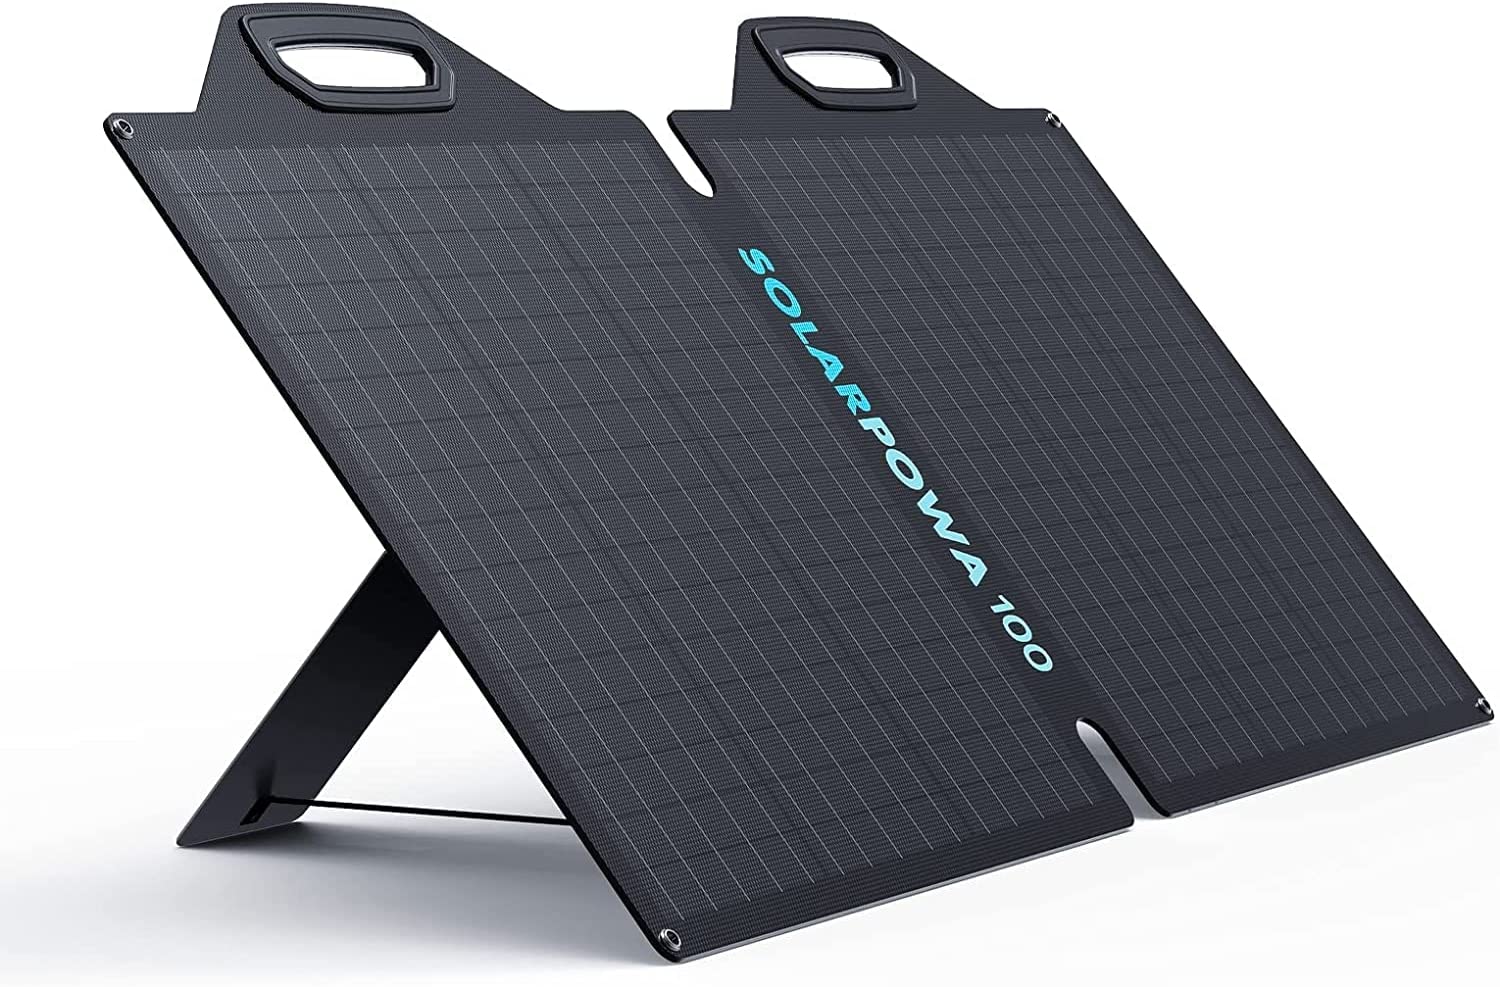 We no longer offer BigBlue Solar Powered products in our online store. - TECHOBOOM